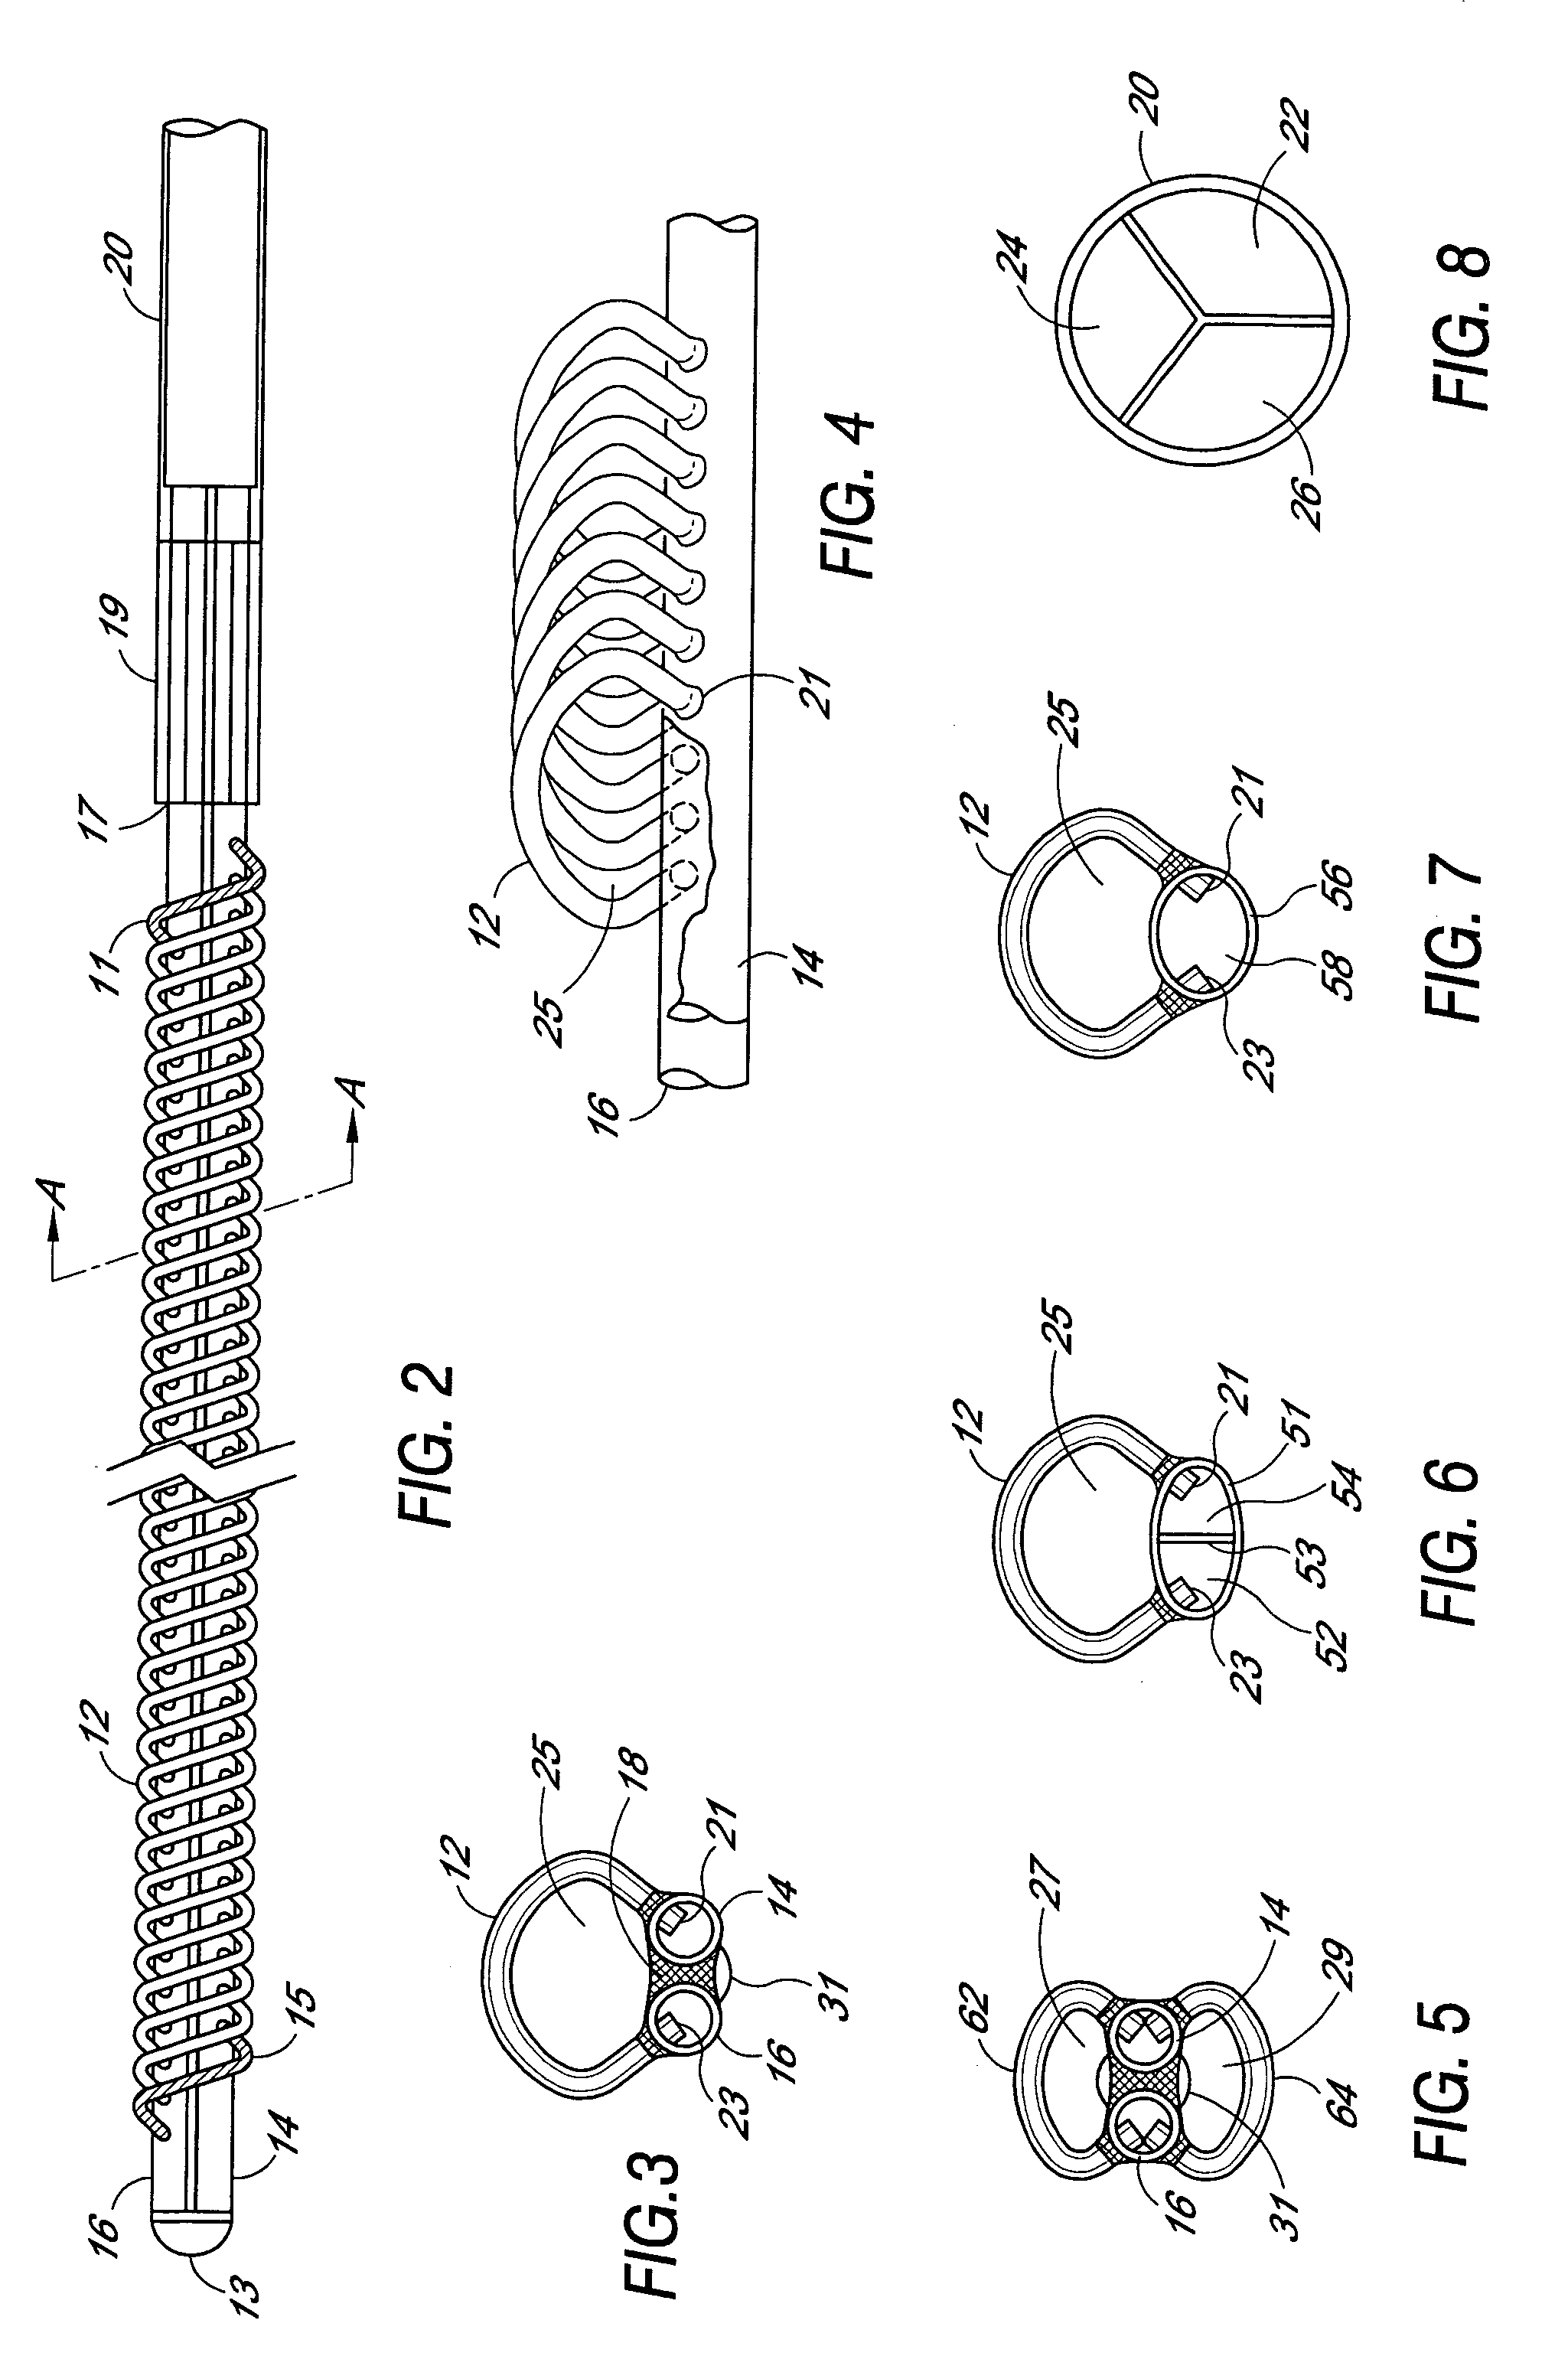 Method and apparatus for patient fluid management